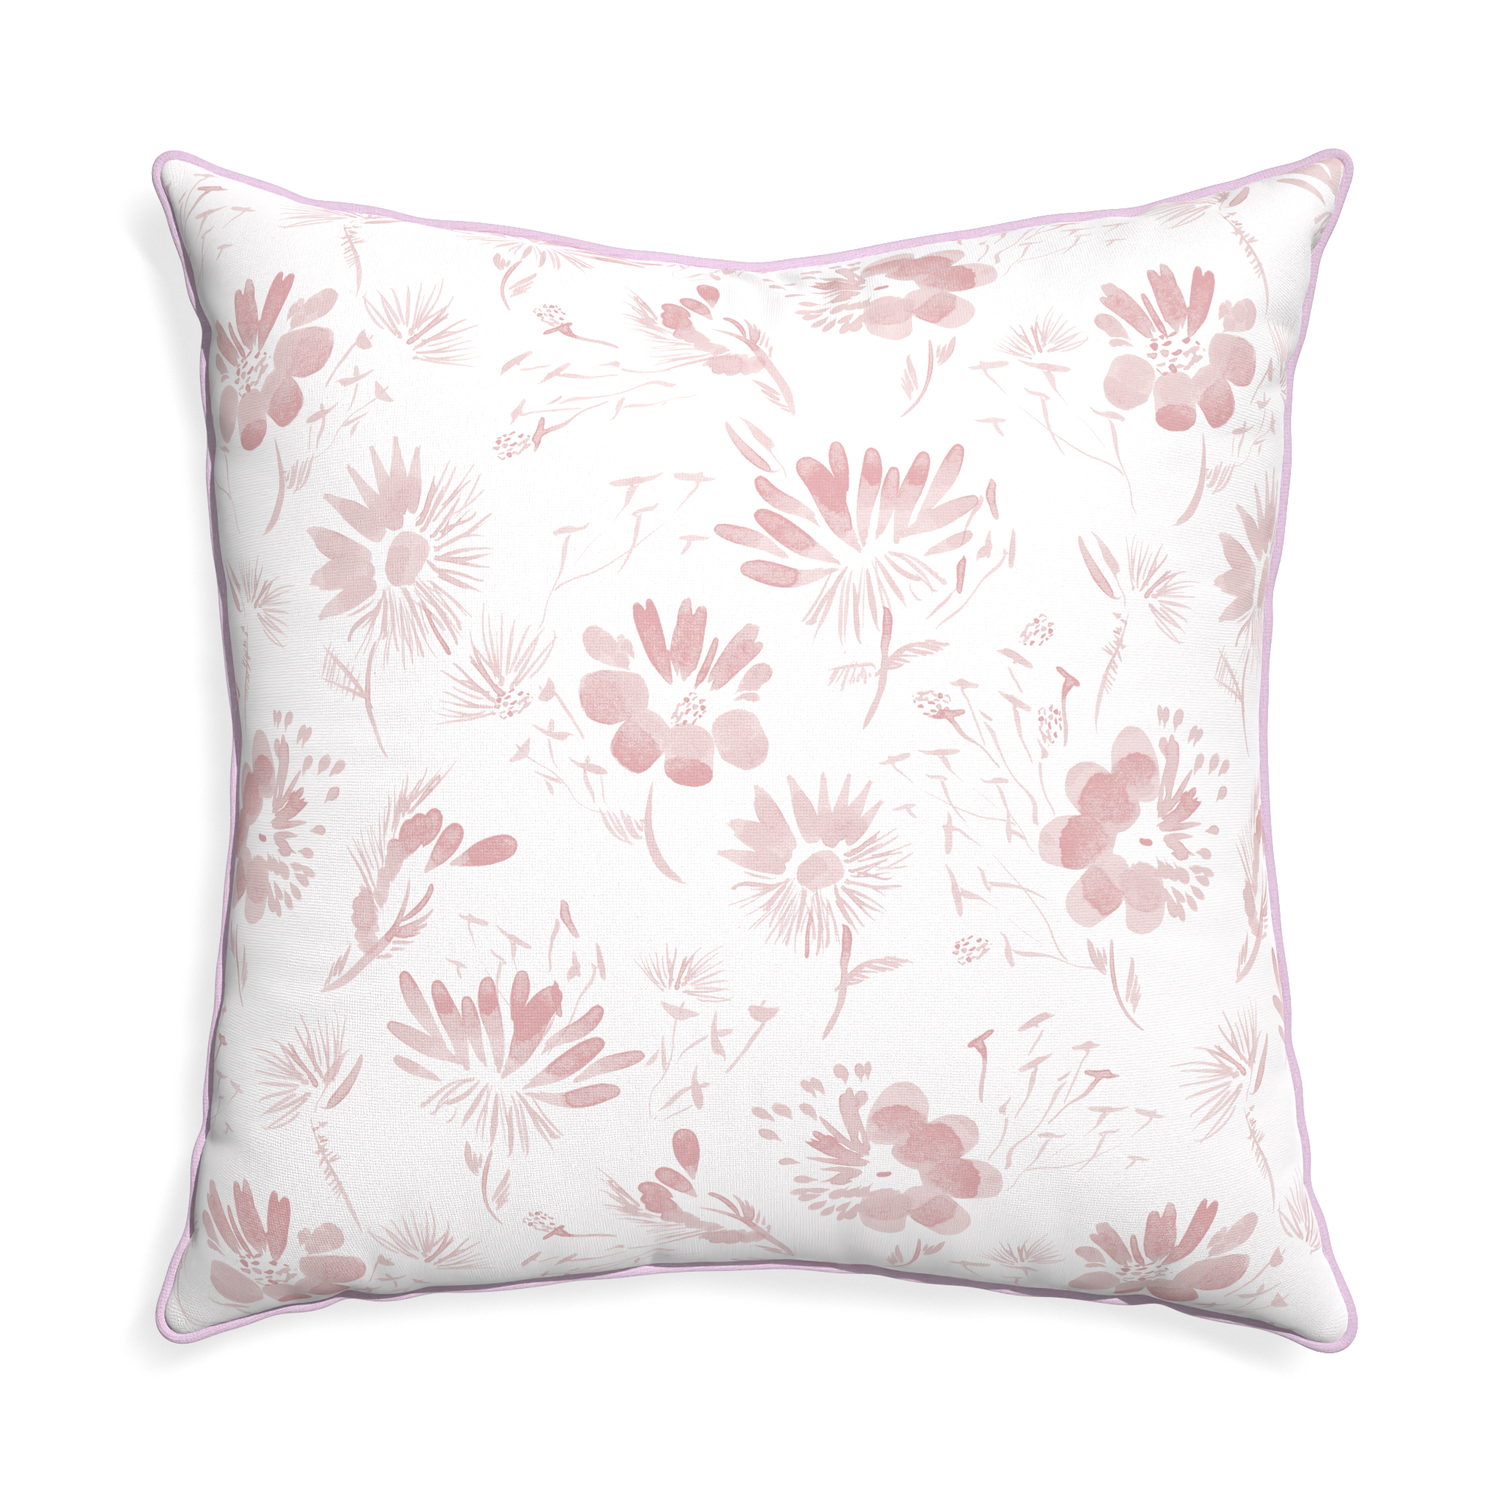 Euro-sham blake custom pink floralpillow with l piping on white background